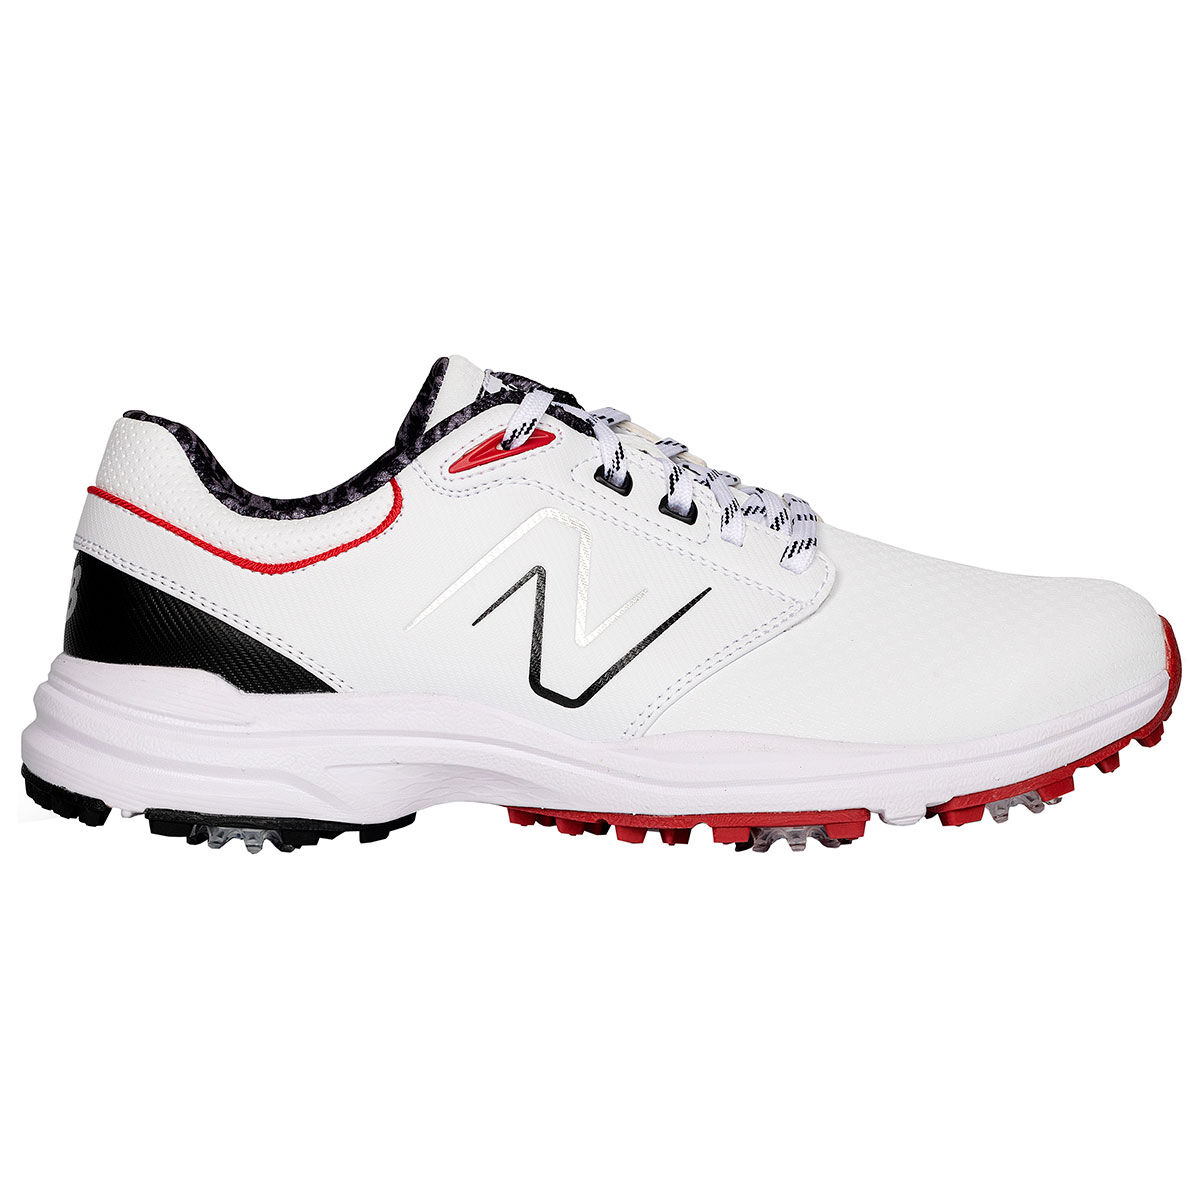 New Balance Men’s Brighton Waterproof Spiked Golf Shoes, Mens, White/red, 10 | American Golf